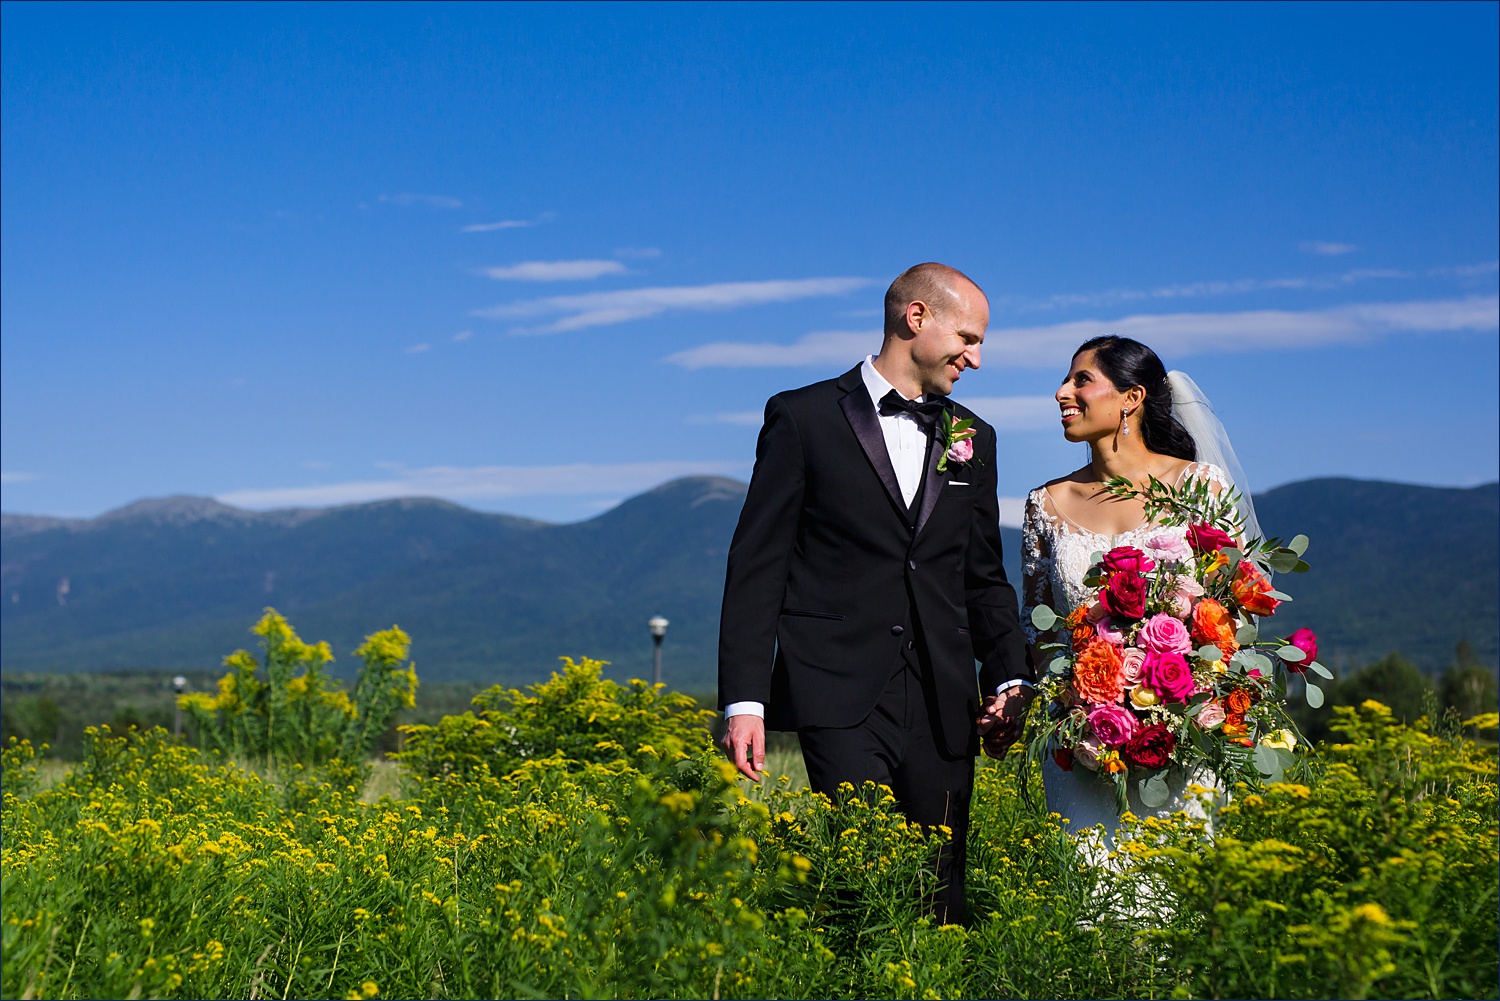 The newlyweds walk out in a meadow with the White Mountains behind them in NH